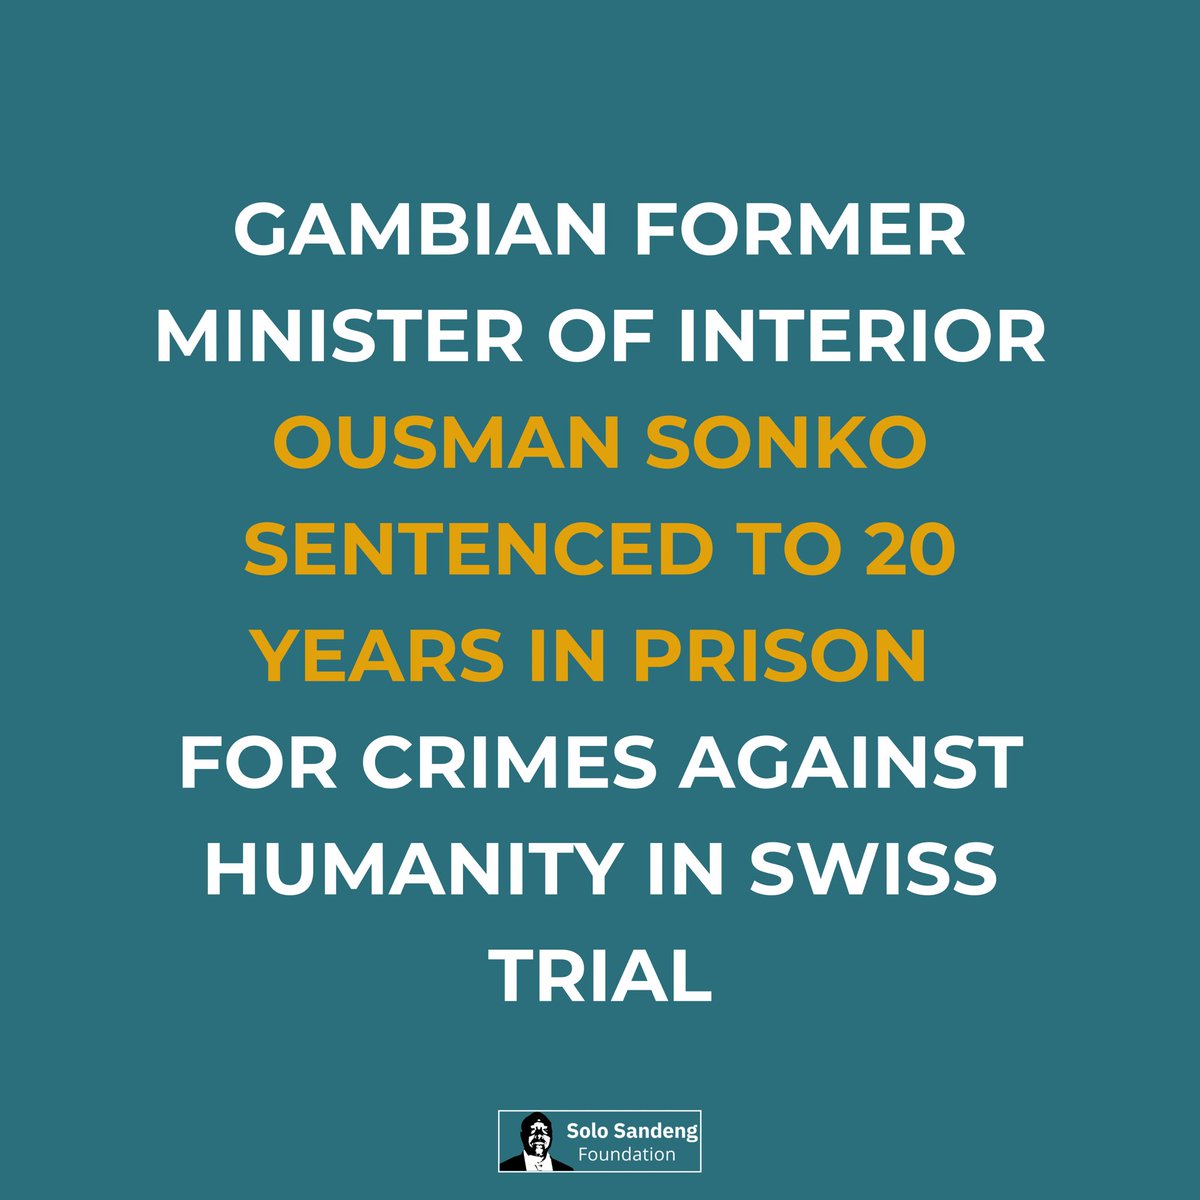 Today, Ousman Sonko, a former Gambian Minister of Interior, was convicted by the Swiss Federal Criminal Court (FCC) for crimes against humanity. The FCC found him guilty of multiple offenses dating back to 2000 under ex-President Yahya Jammeh's rule.